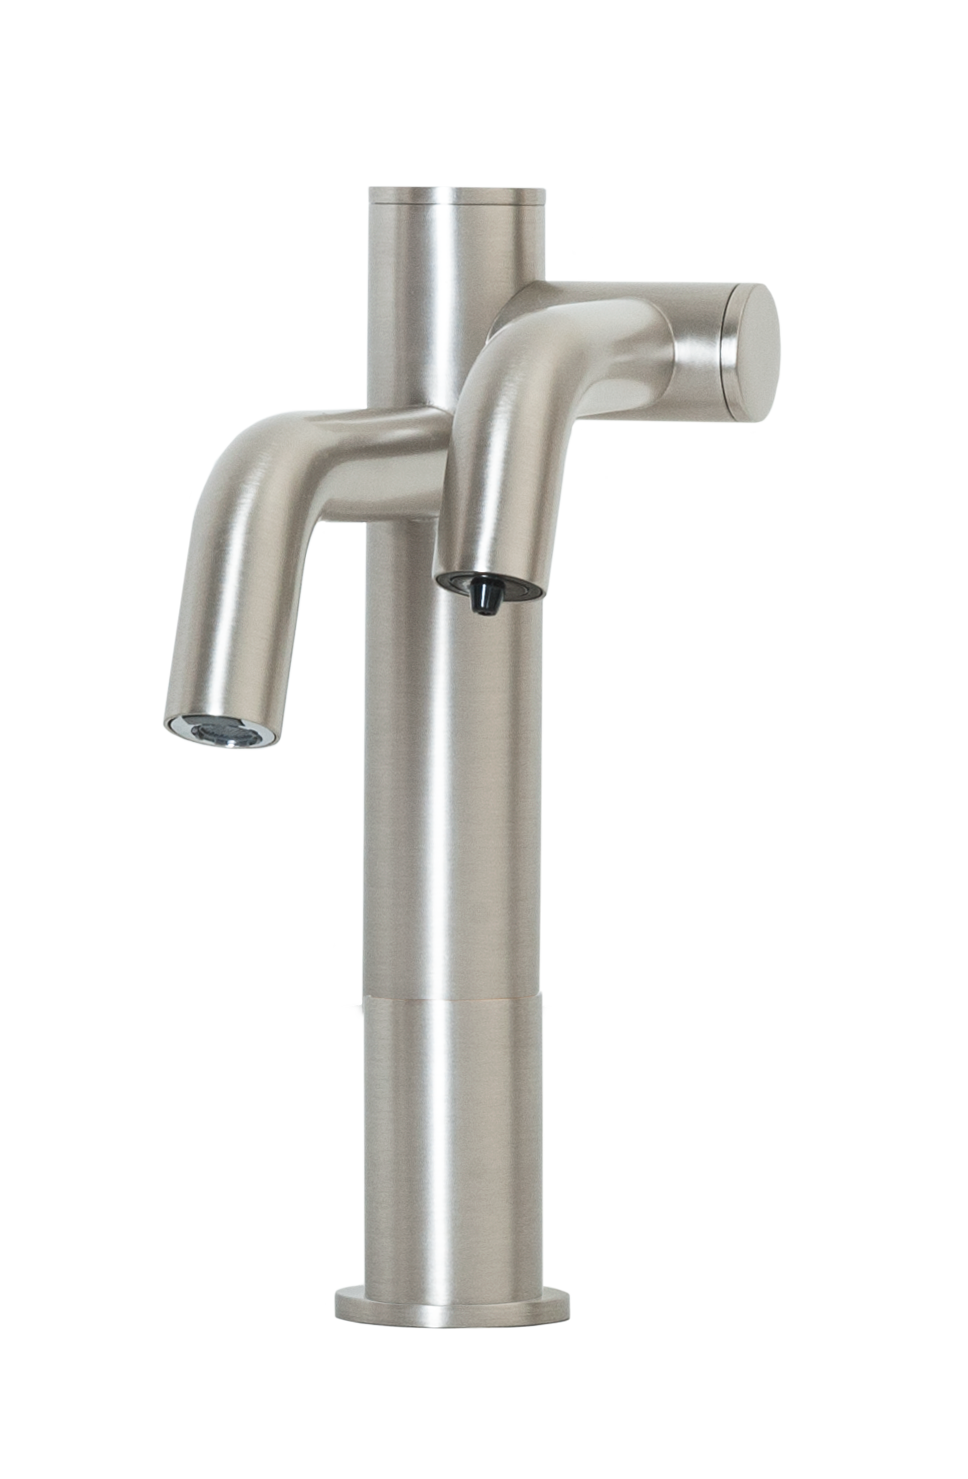 Two-in-One Automatic Faucet and Automatic Soap Dispenser For Vessel Sink Applications In Satin Nickel